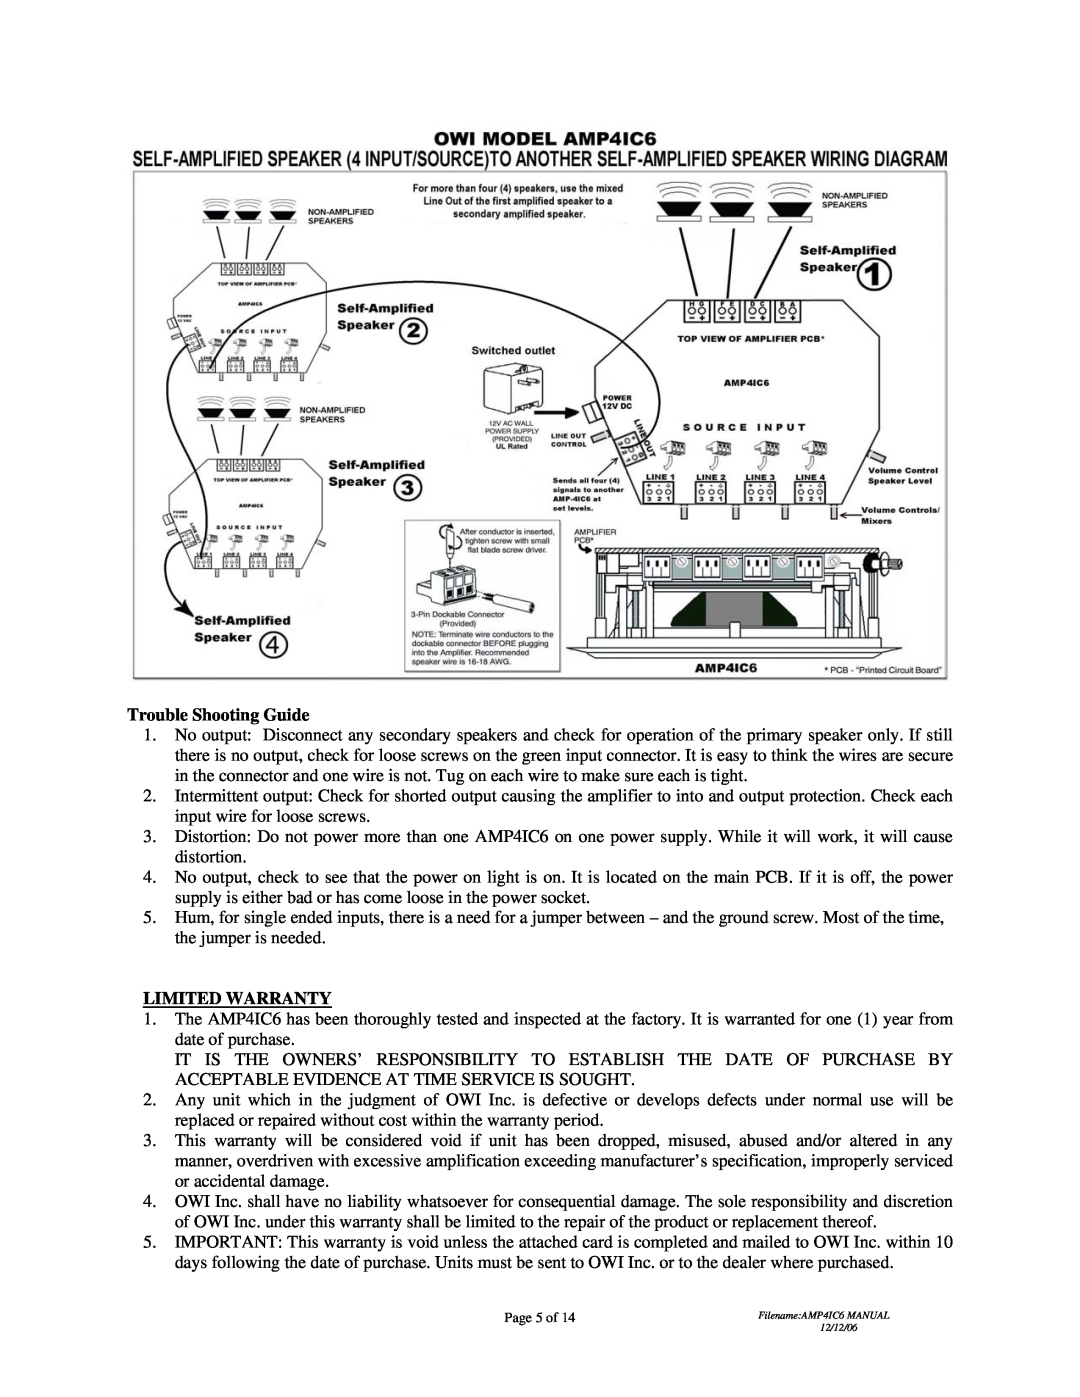 OWI AMP4IC6 installation instructions Trouble Shooting Guide, Limited Warranty, Page 5 of 